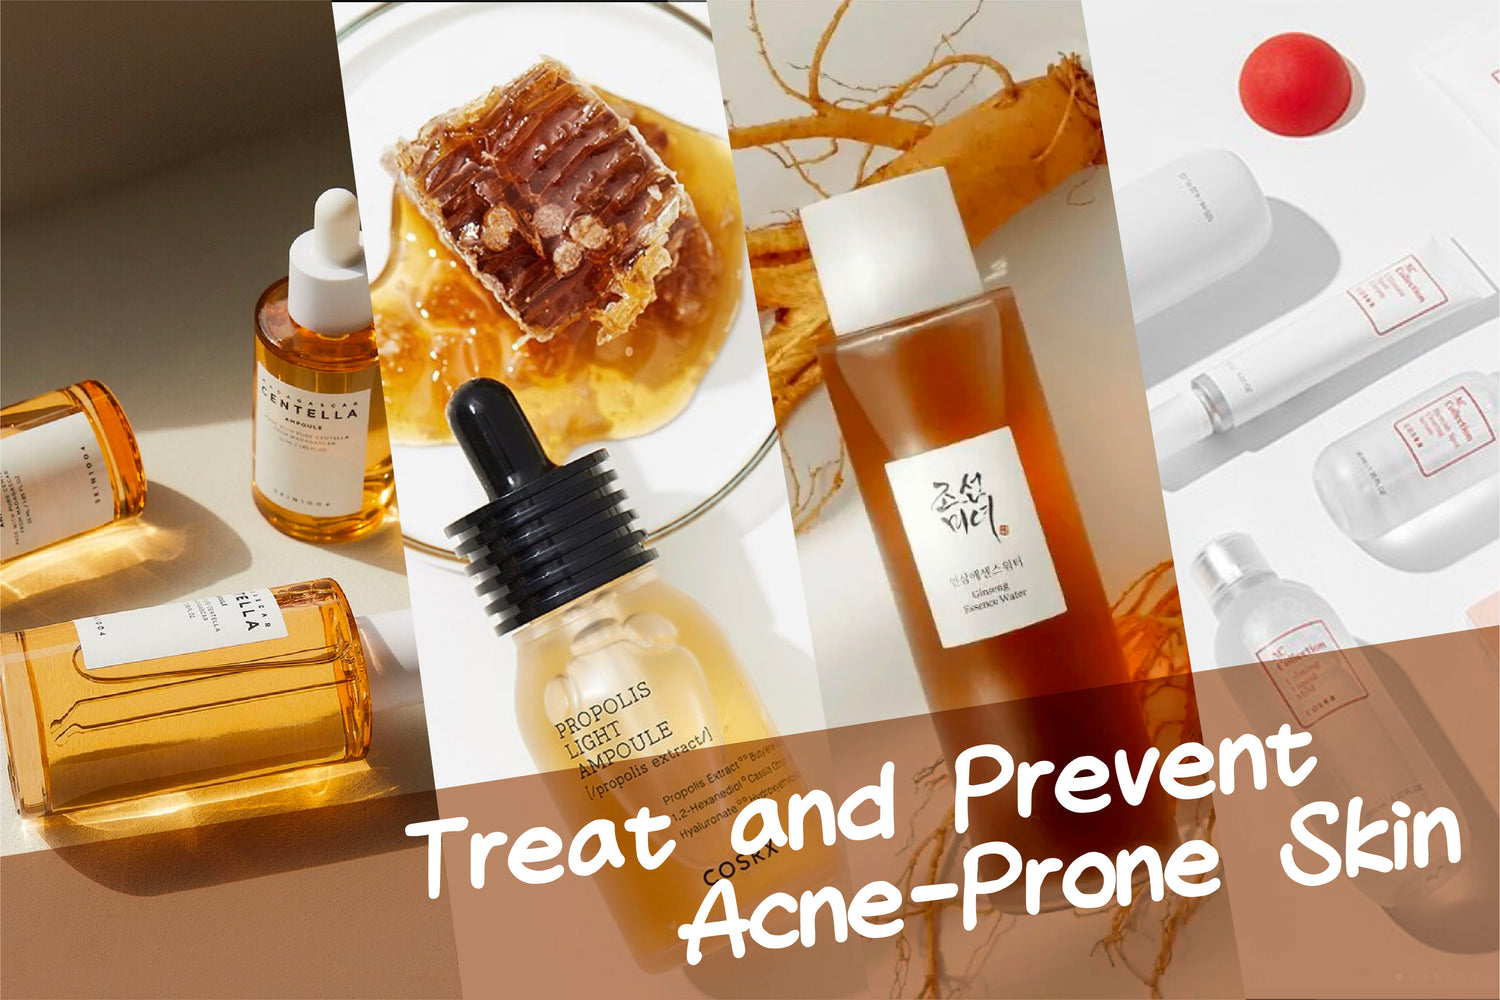 The Guide to Caring for Acne-Prone Skin